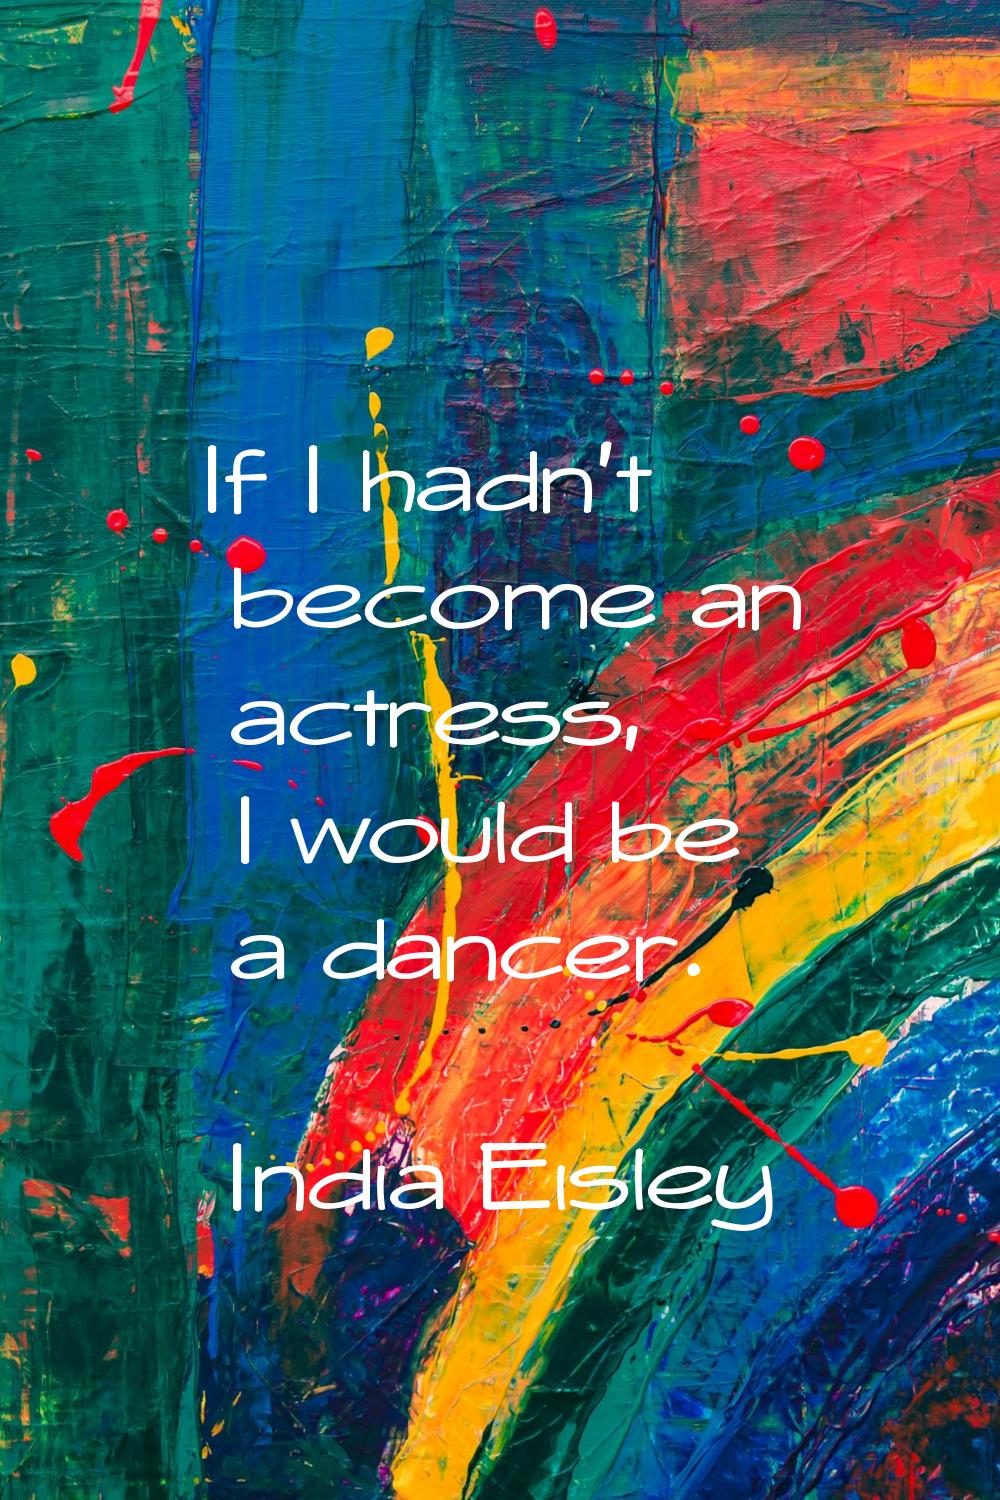 If I hadn't become an actress, I would be a dancer.